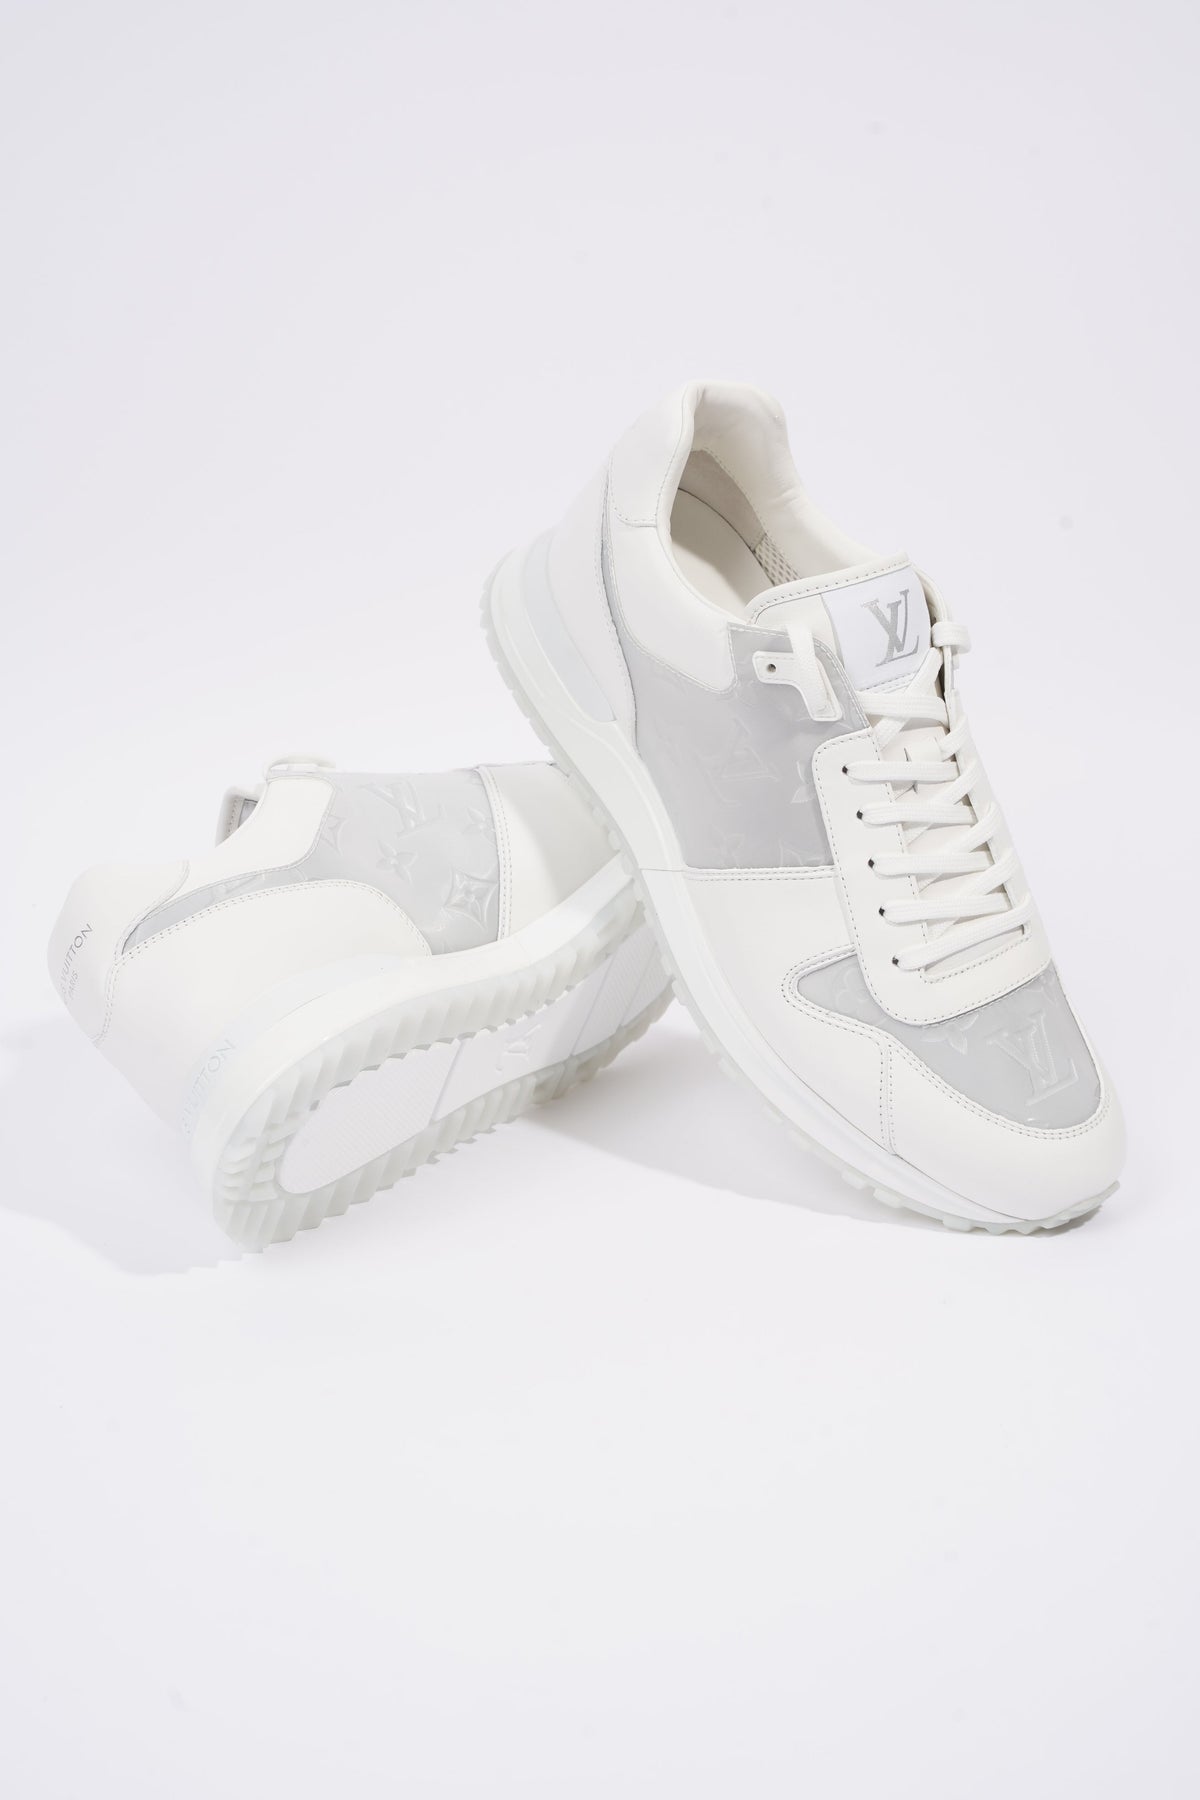 Louis Vuitton Mens Runaway Trainers White EU 41.5 / UK 7.5 – Luxe Collective